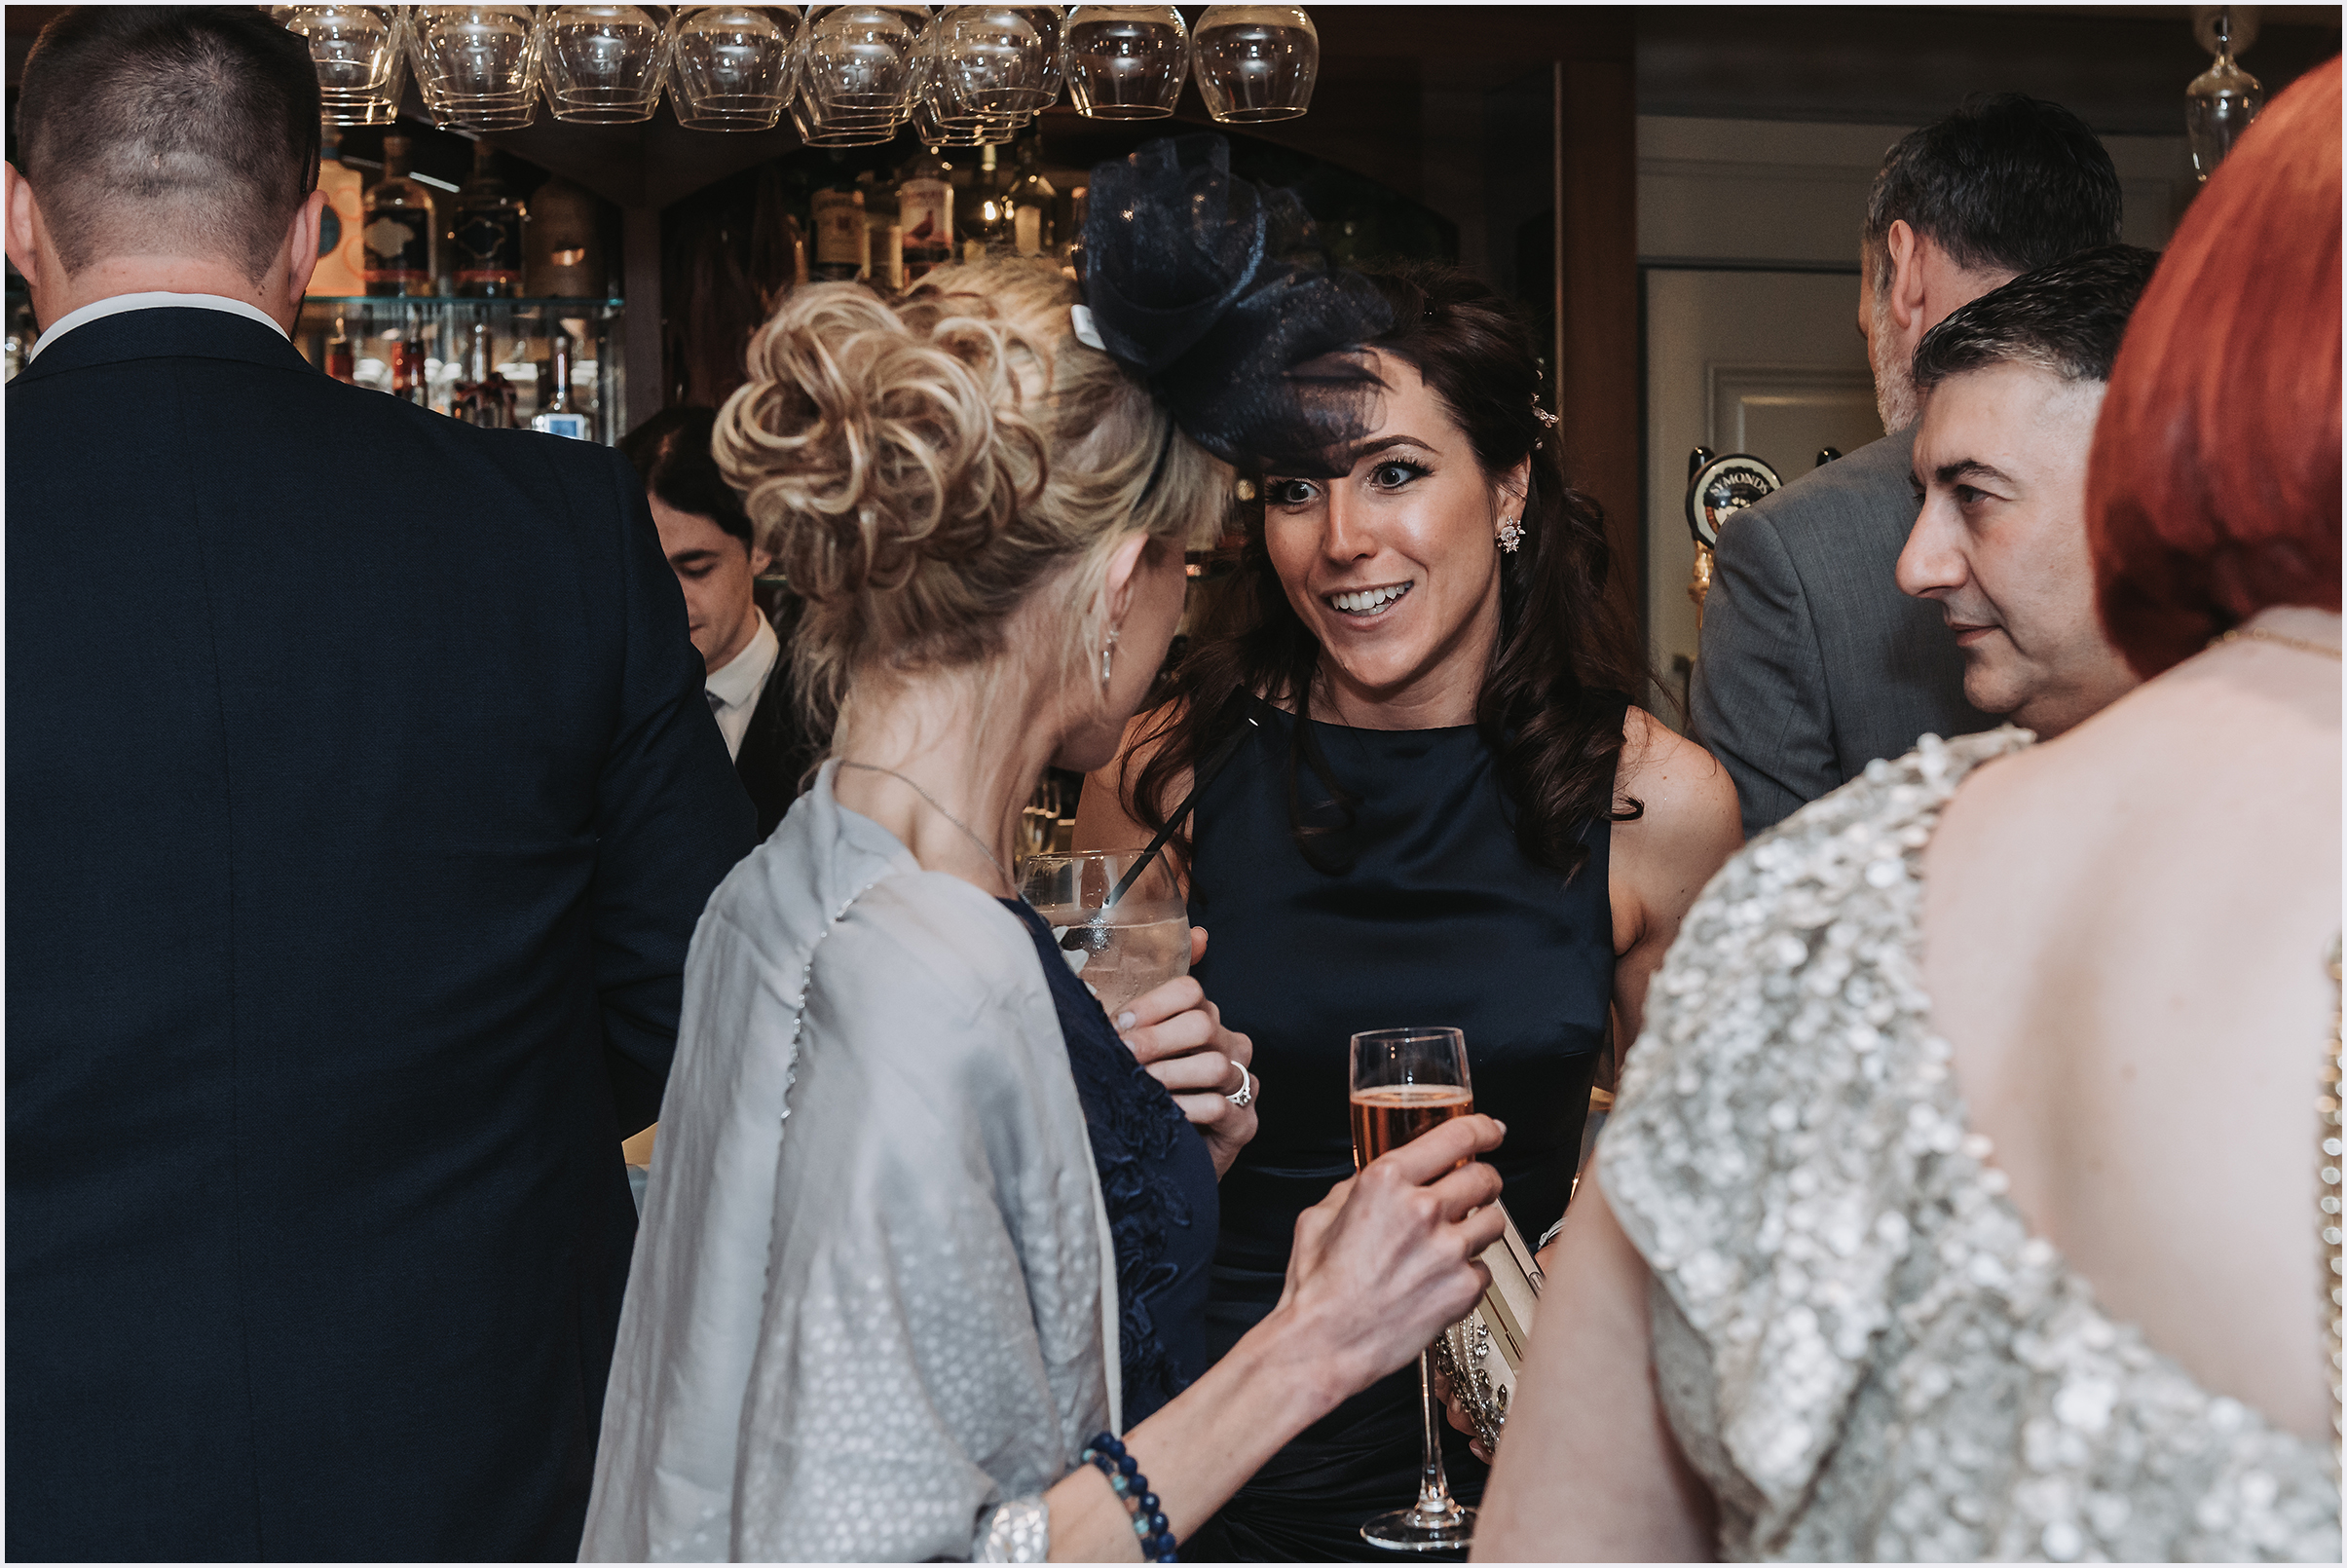 Guests chatting happily during a wedding drinks reception at The Grosvenor Pulford Hotel and Spa.